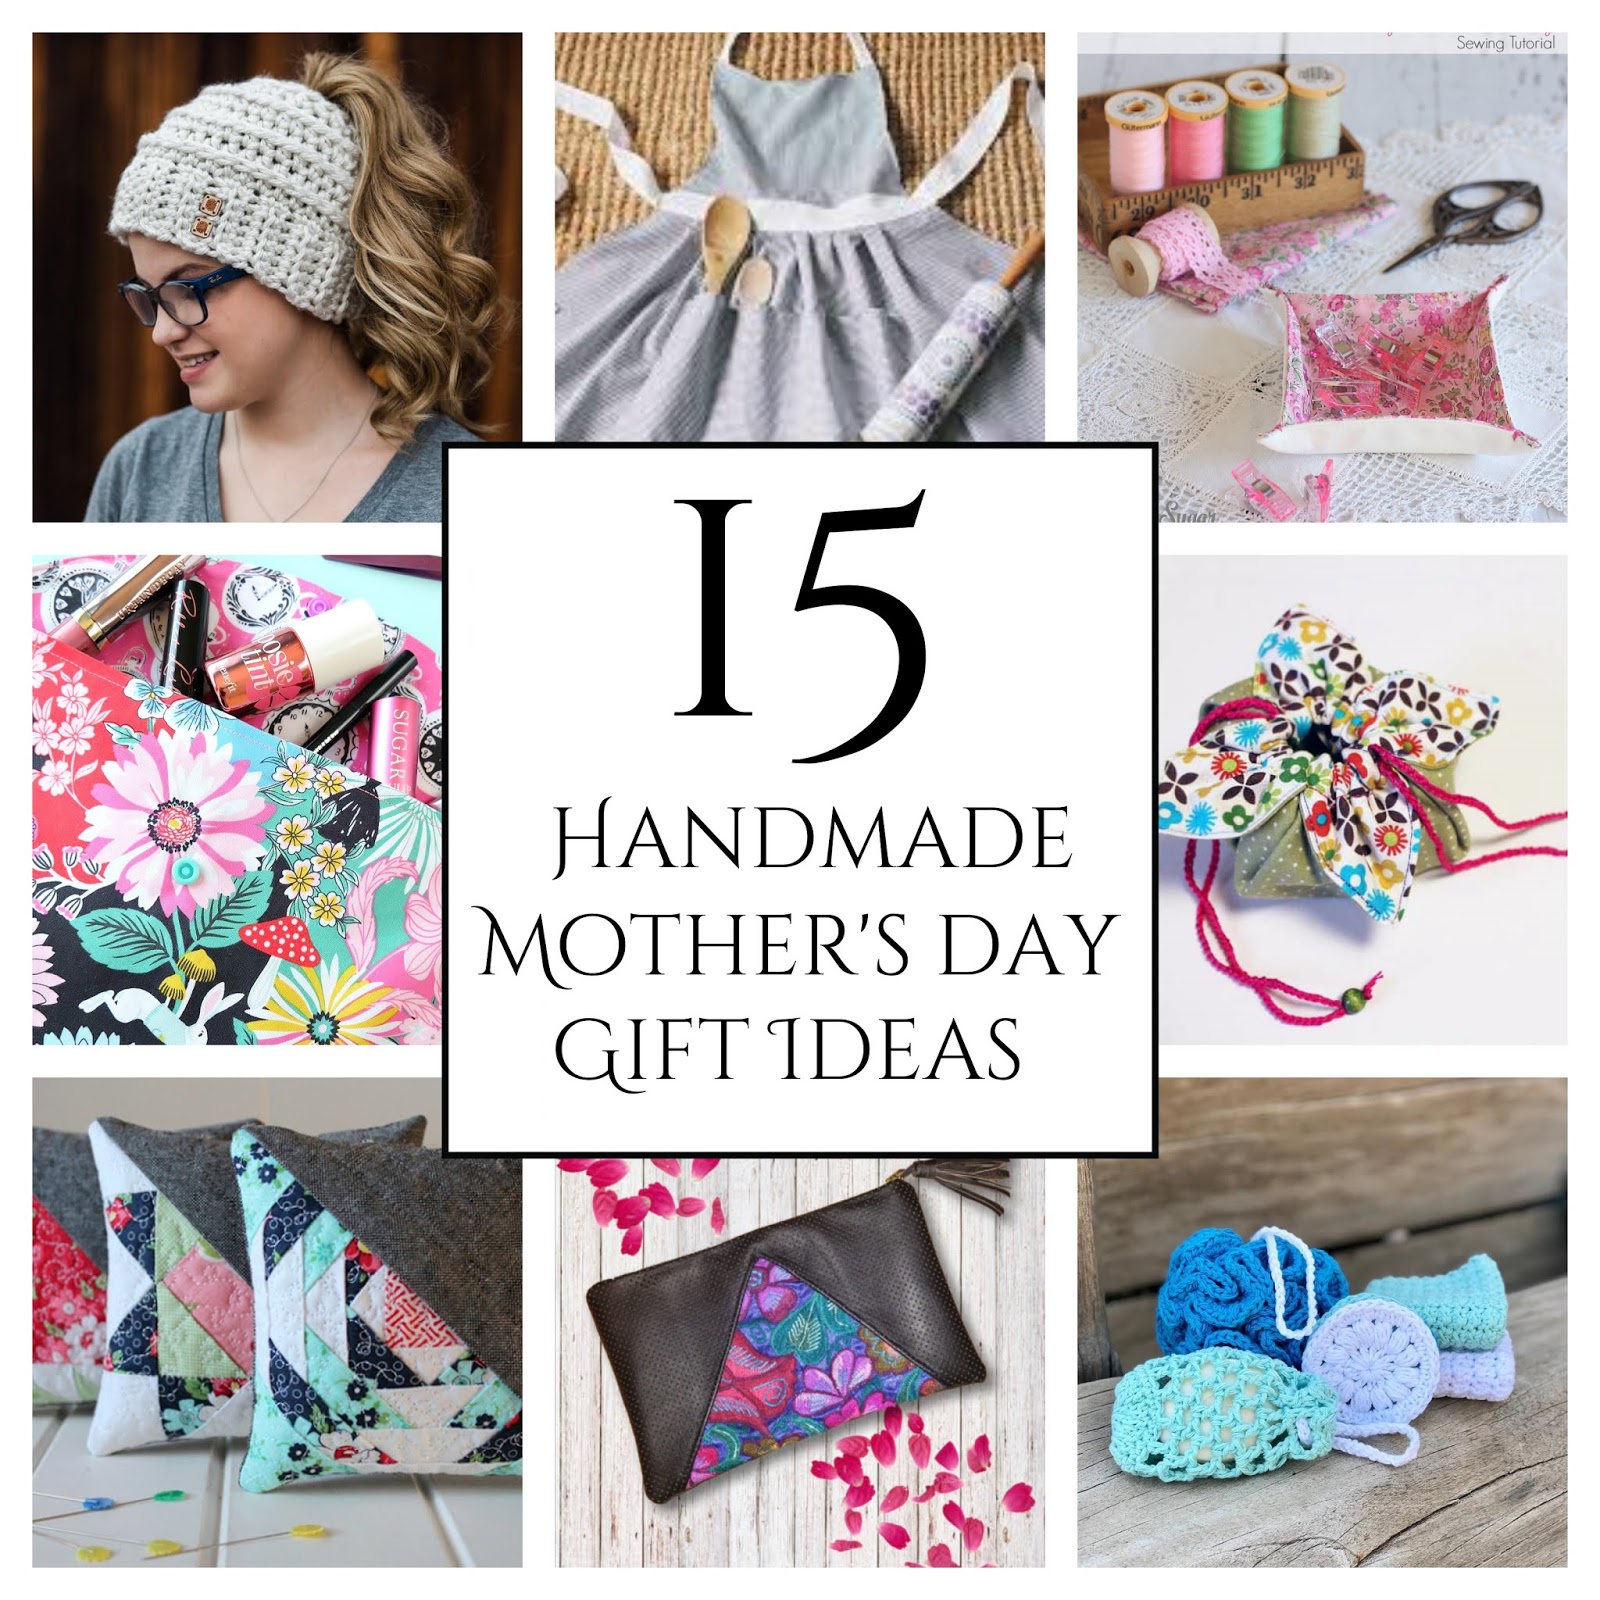 15 Homemade Mother's Day Gift that Kids Can Make!